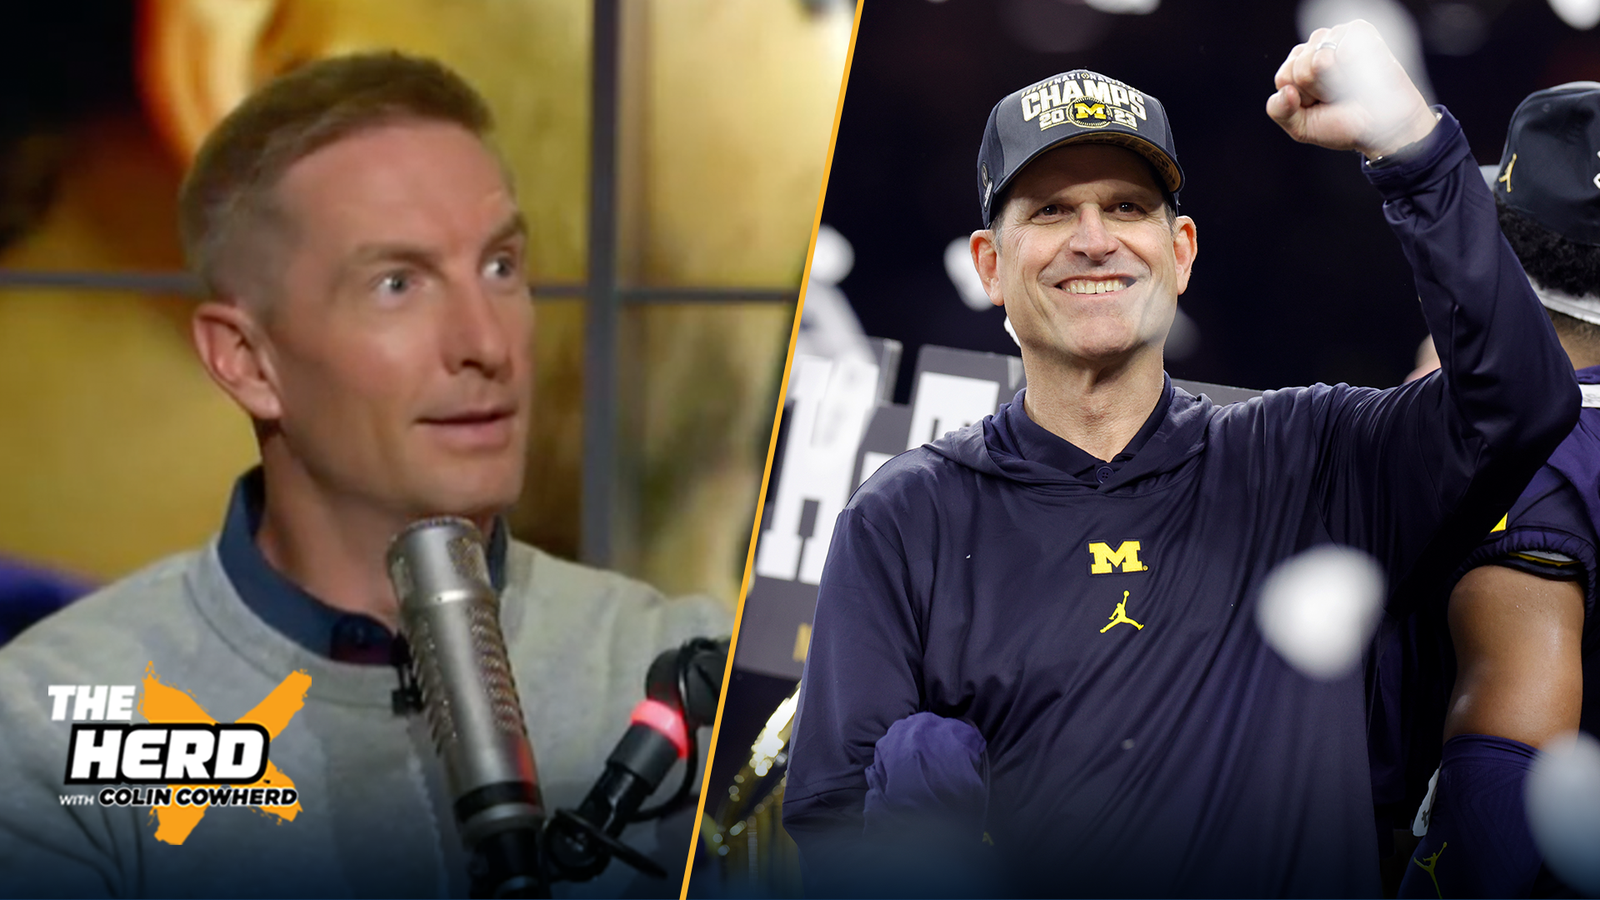 Jim Harbaugh's legacy cemented with Michigan's championship win